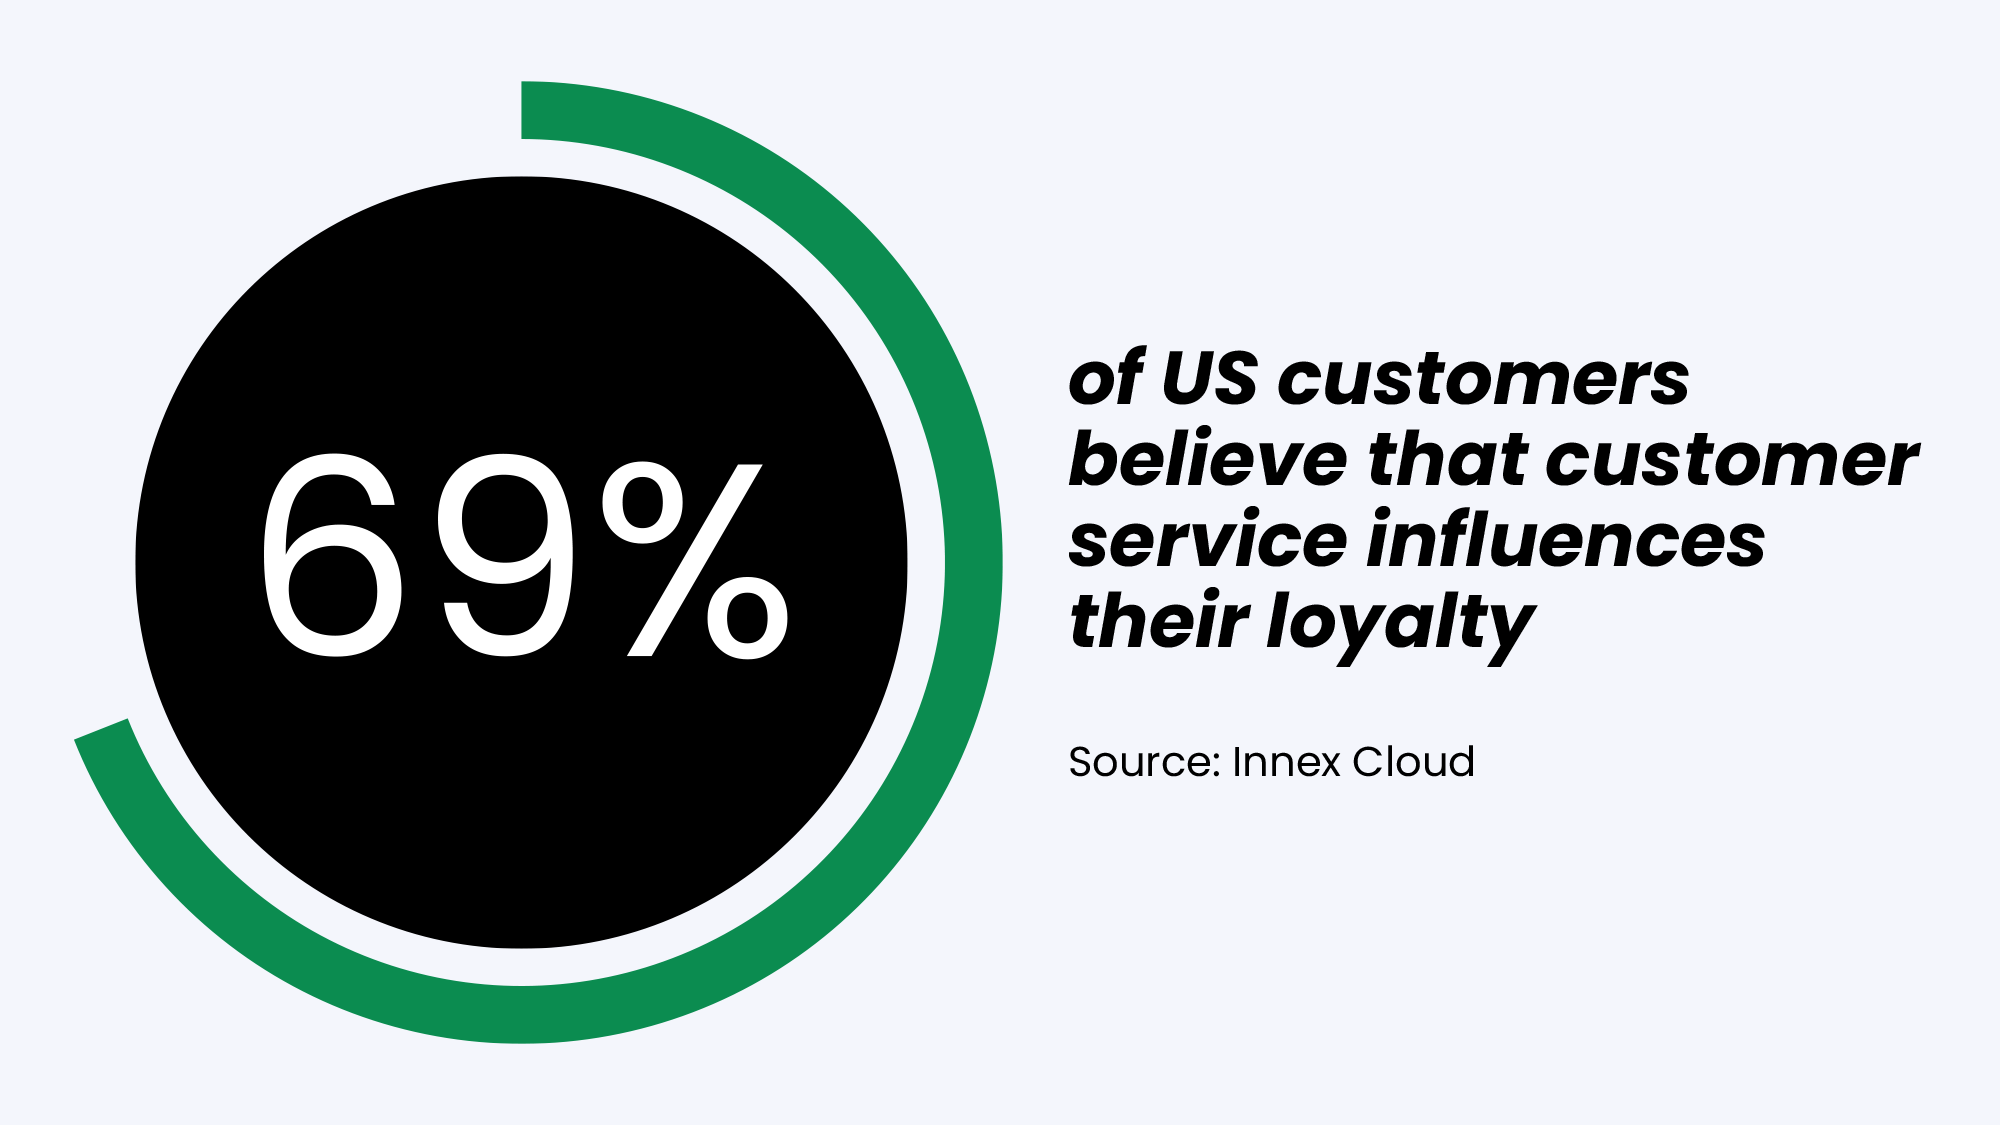 69% of US customers believe that customer service influences their loyalty